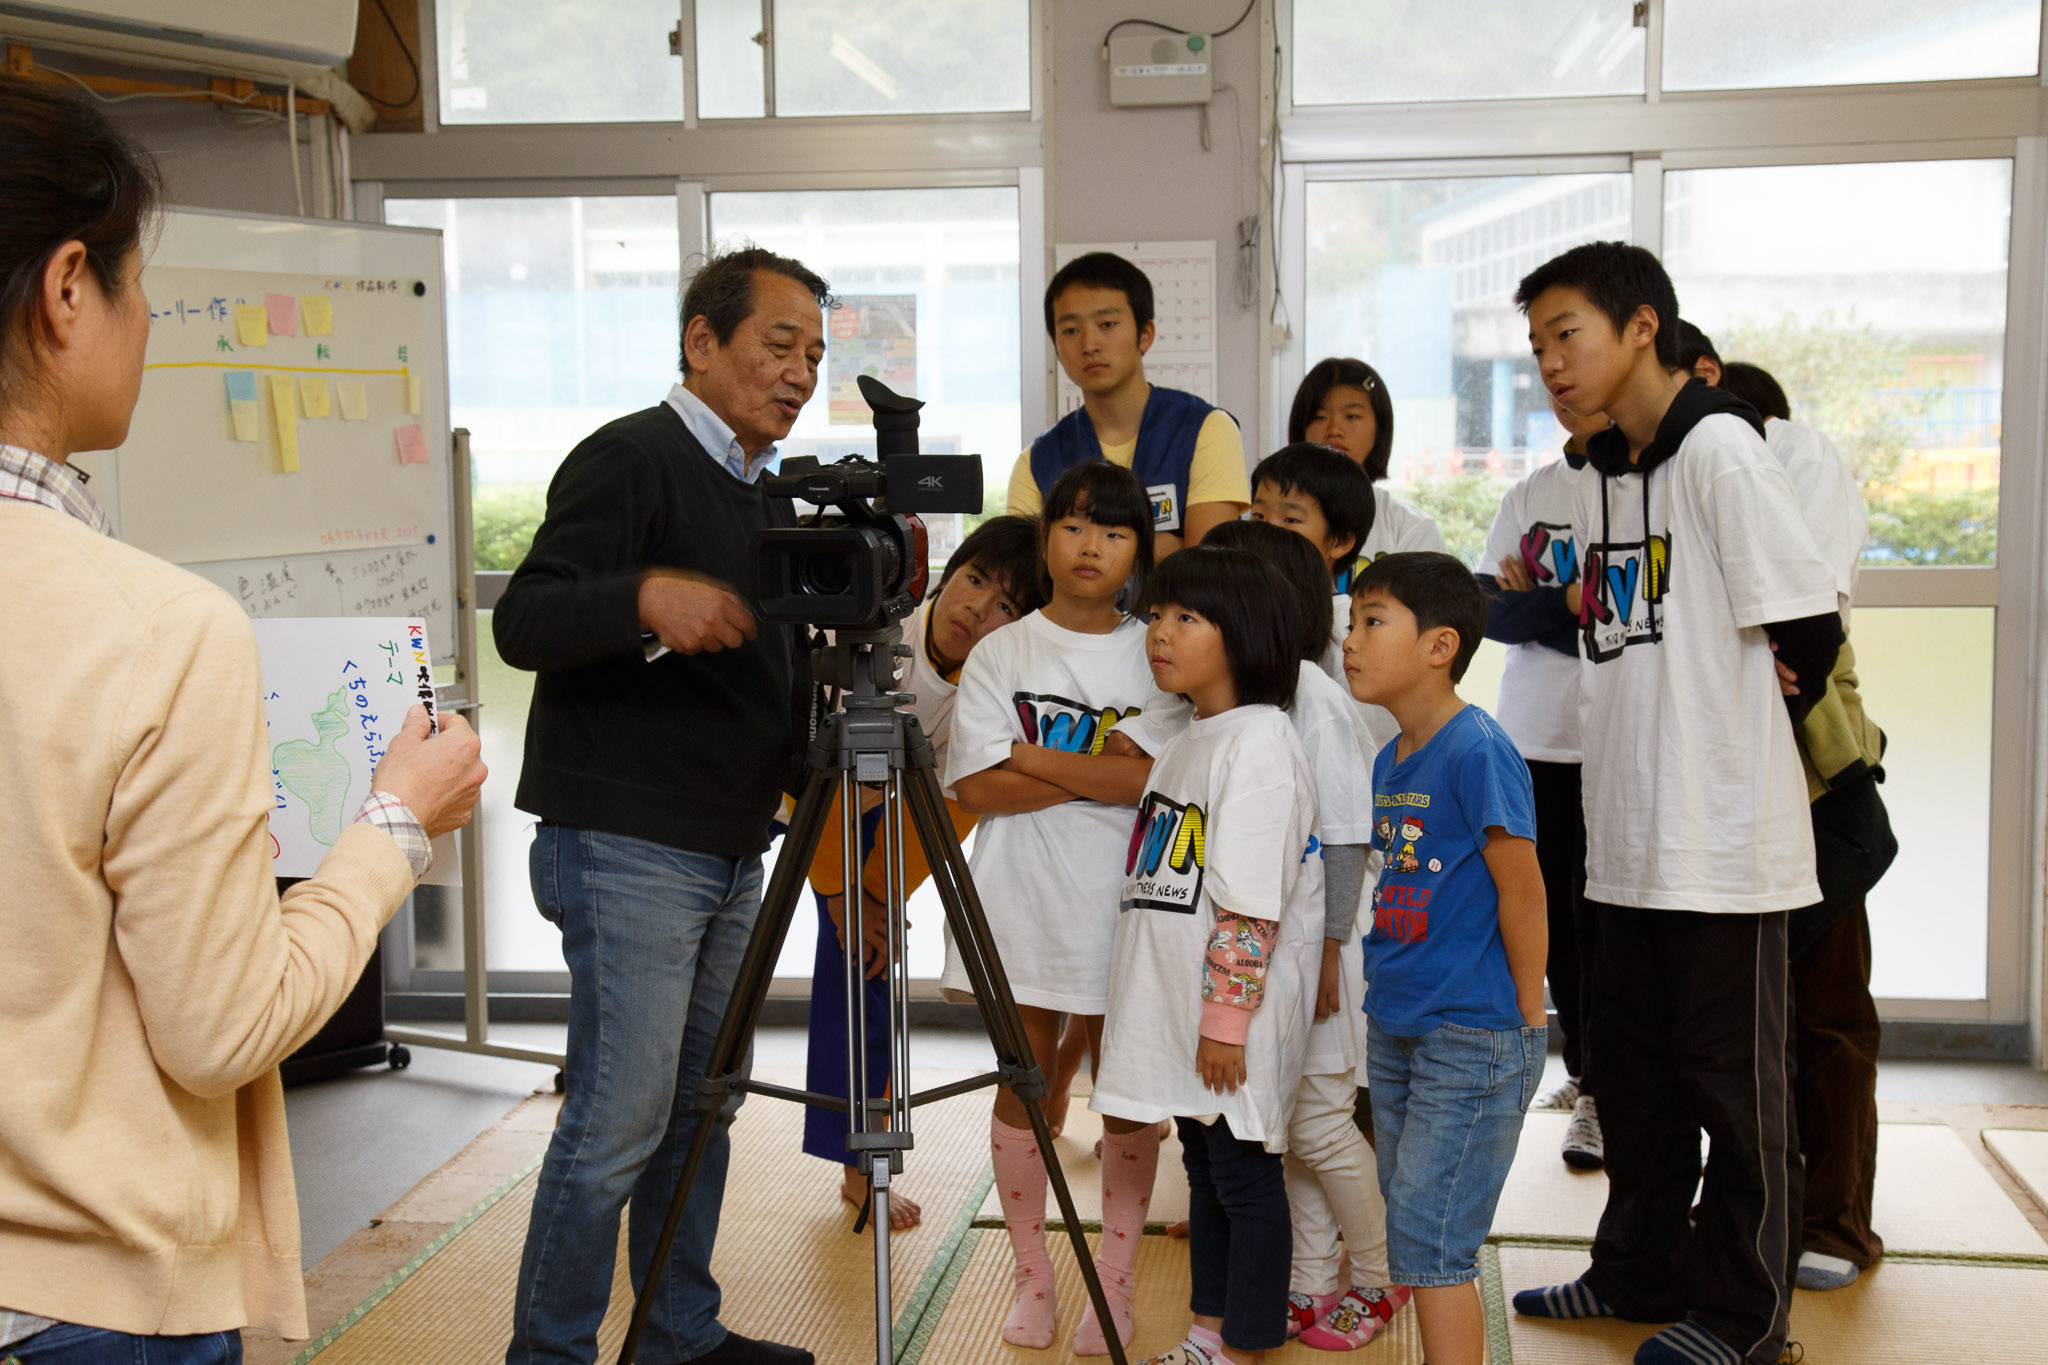 Photo: Children intently working on video production